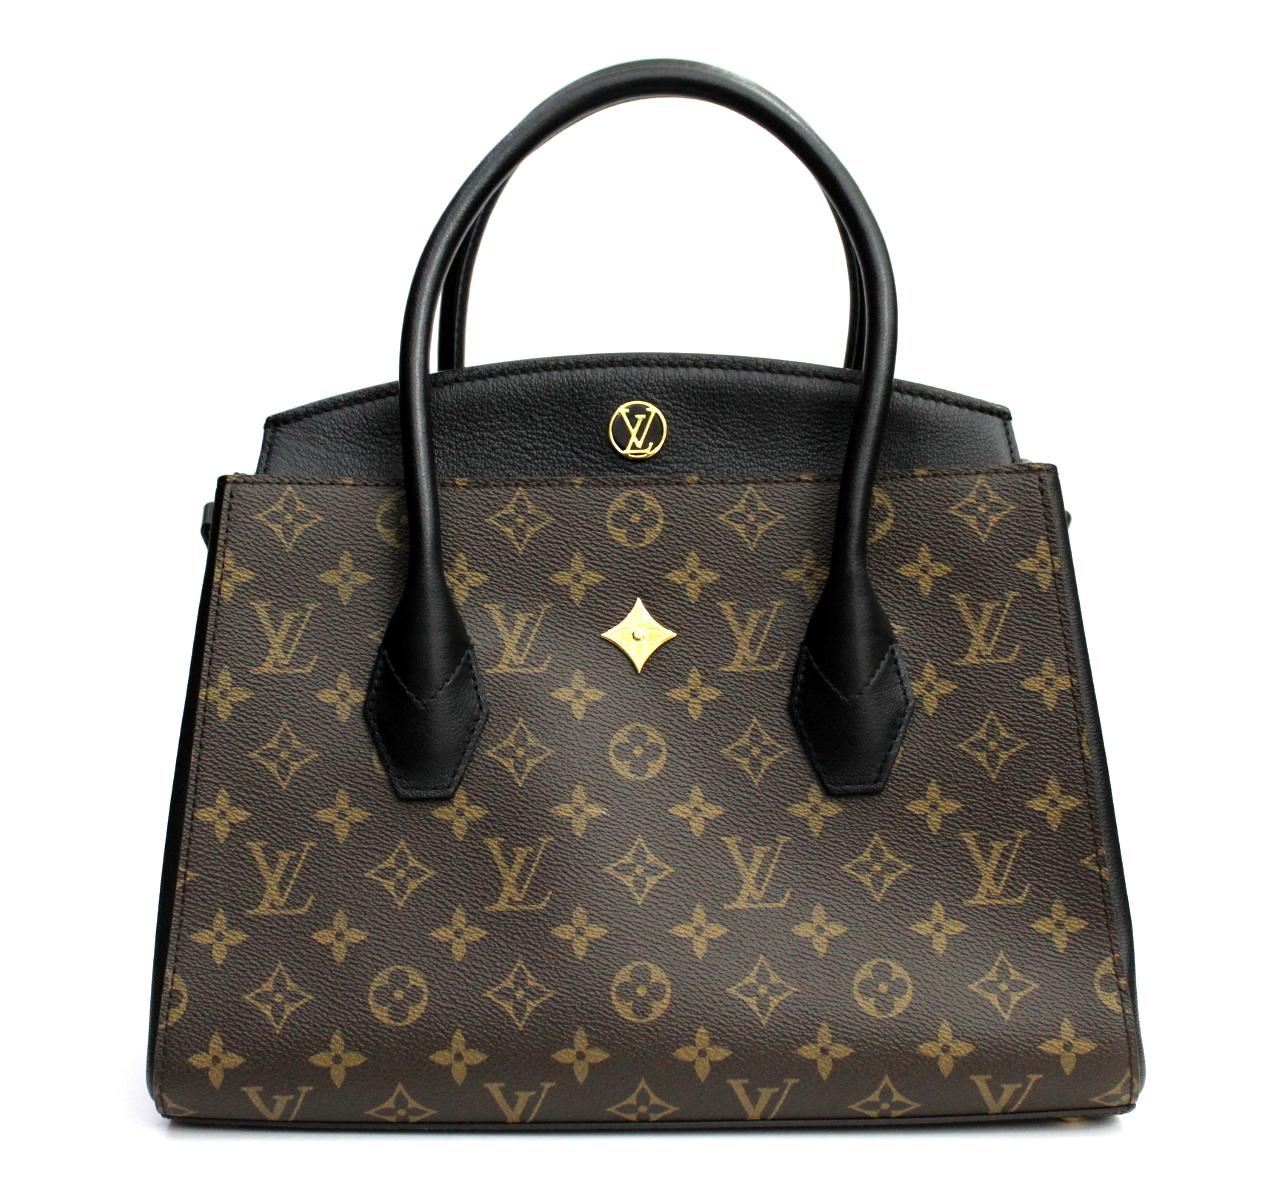 LOUIS VUITTON Noir Monogram Canvas Florine Bag.  It features the Monogram canvas with black calf leather details and golden metallic hardware. It has rolled Toron handles and a detachable shoulder strap. It has two compartments - one with a flap top